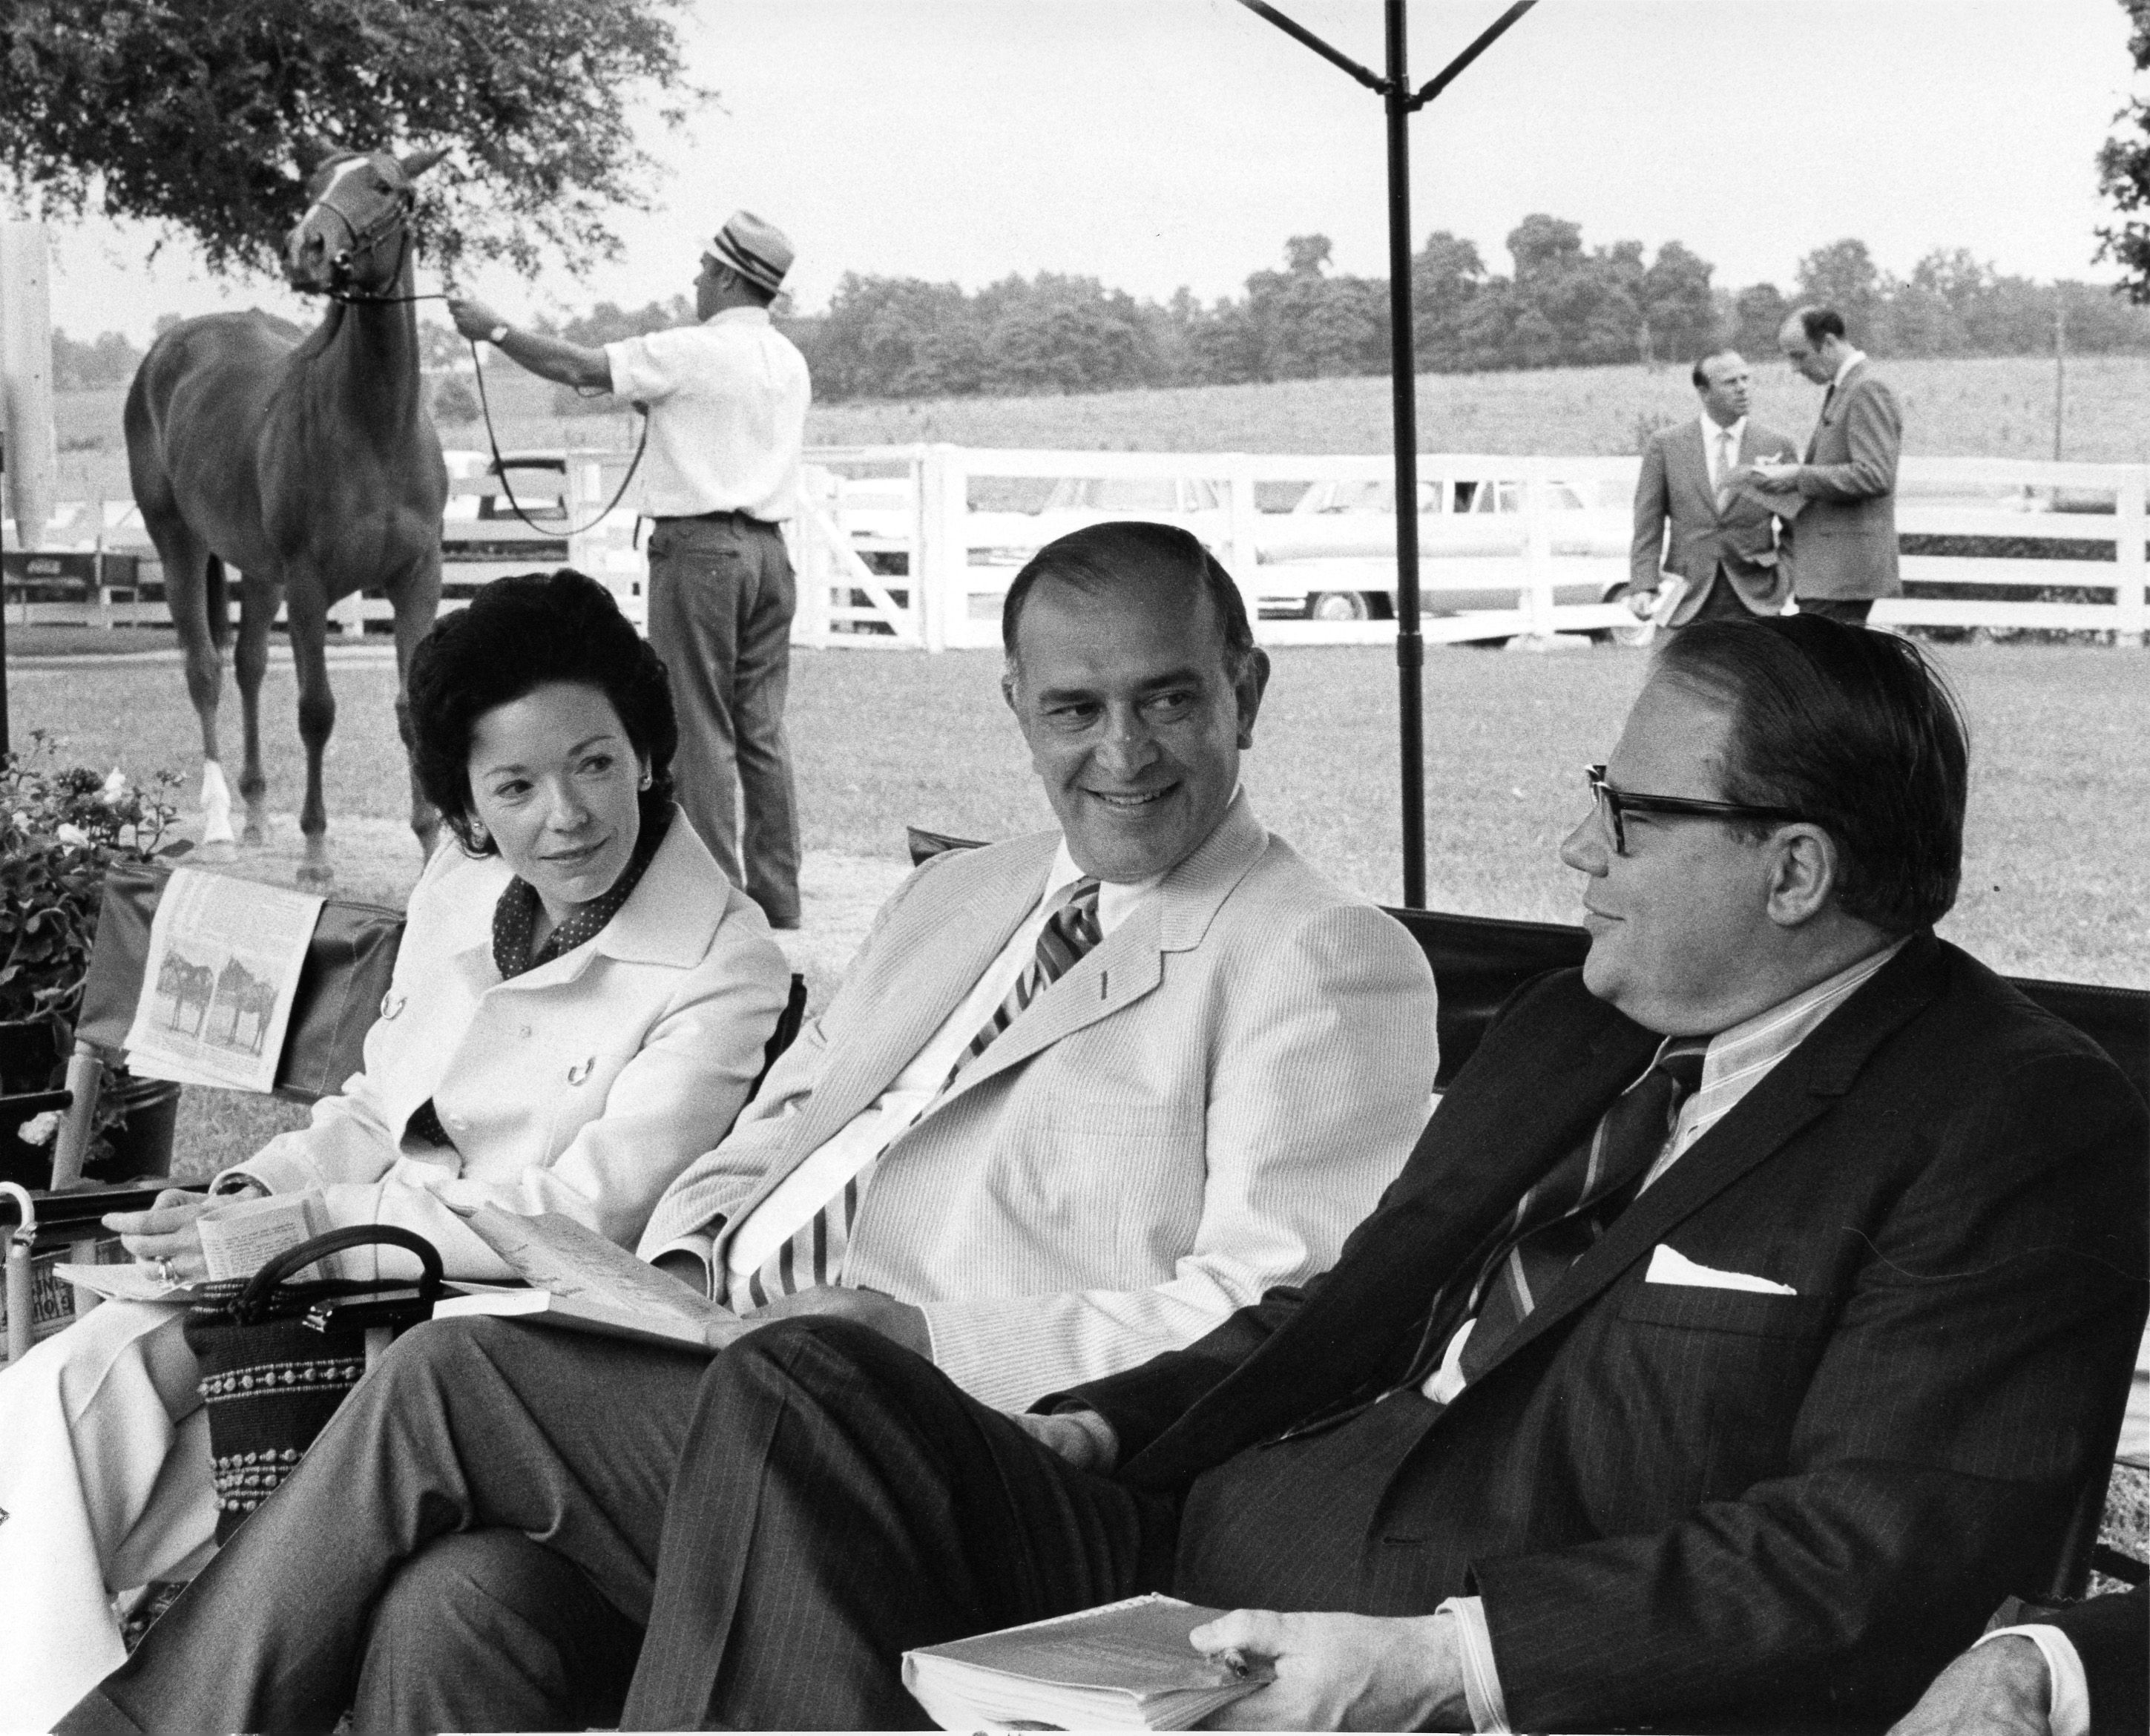 Mr. and Mrs. Nelson Bunker with John Gaines (center) (Keeneland Association)